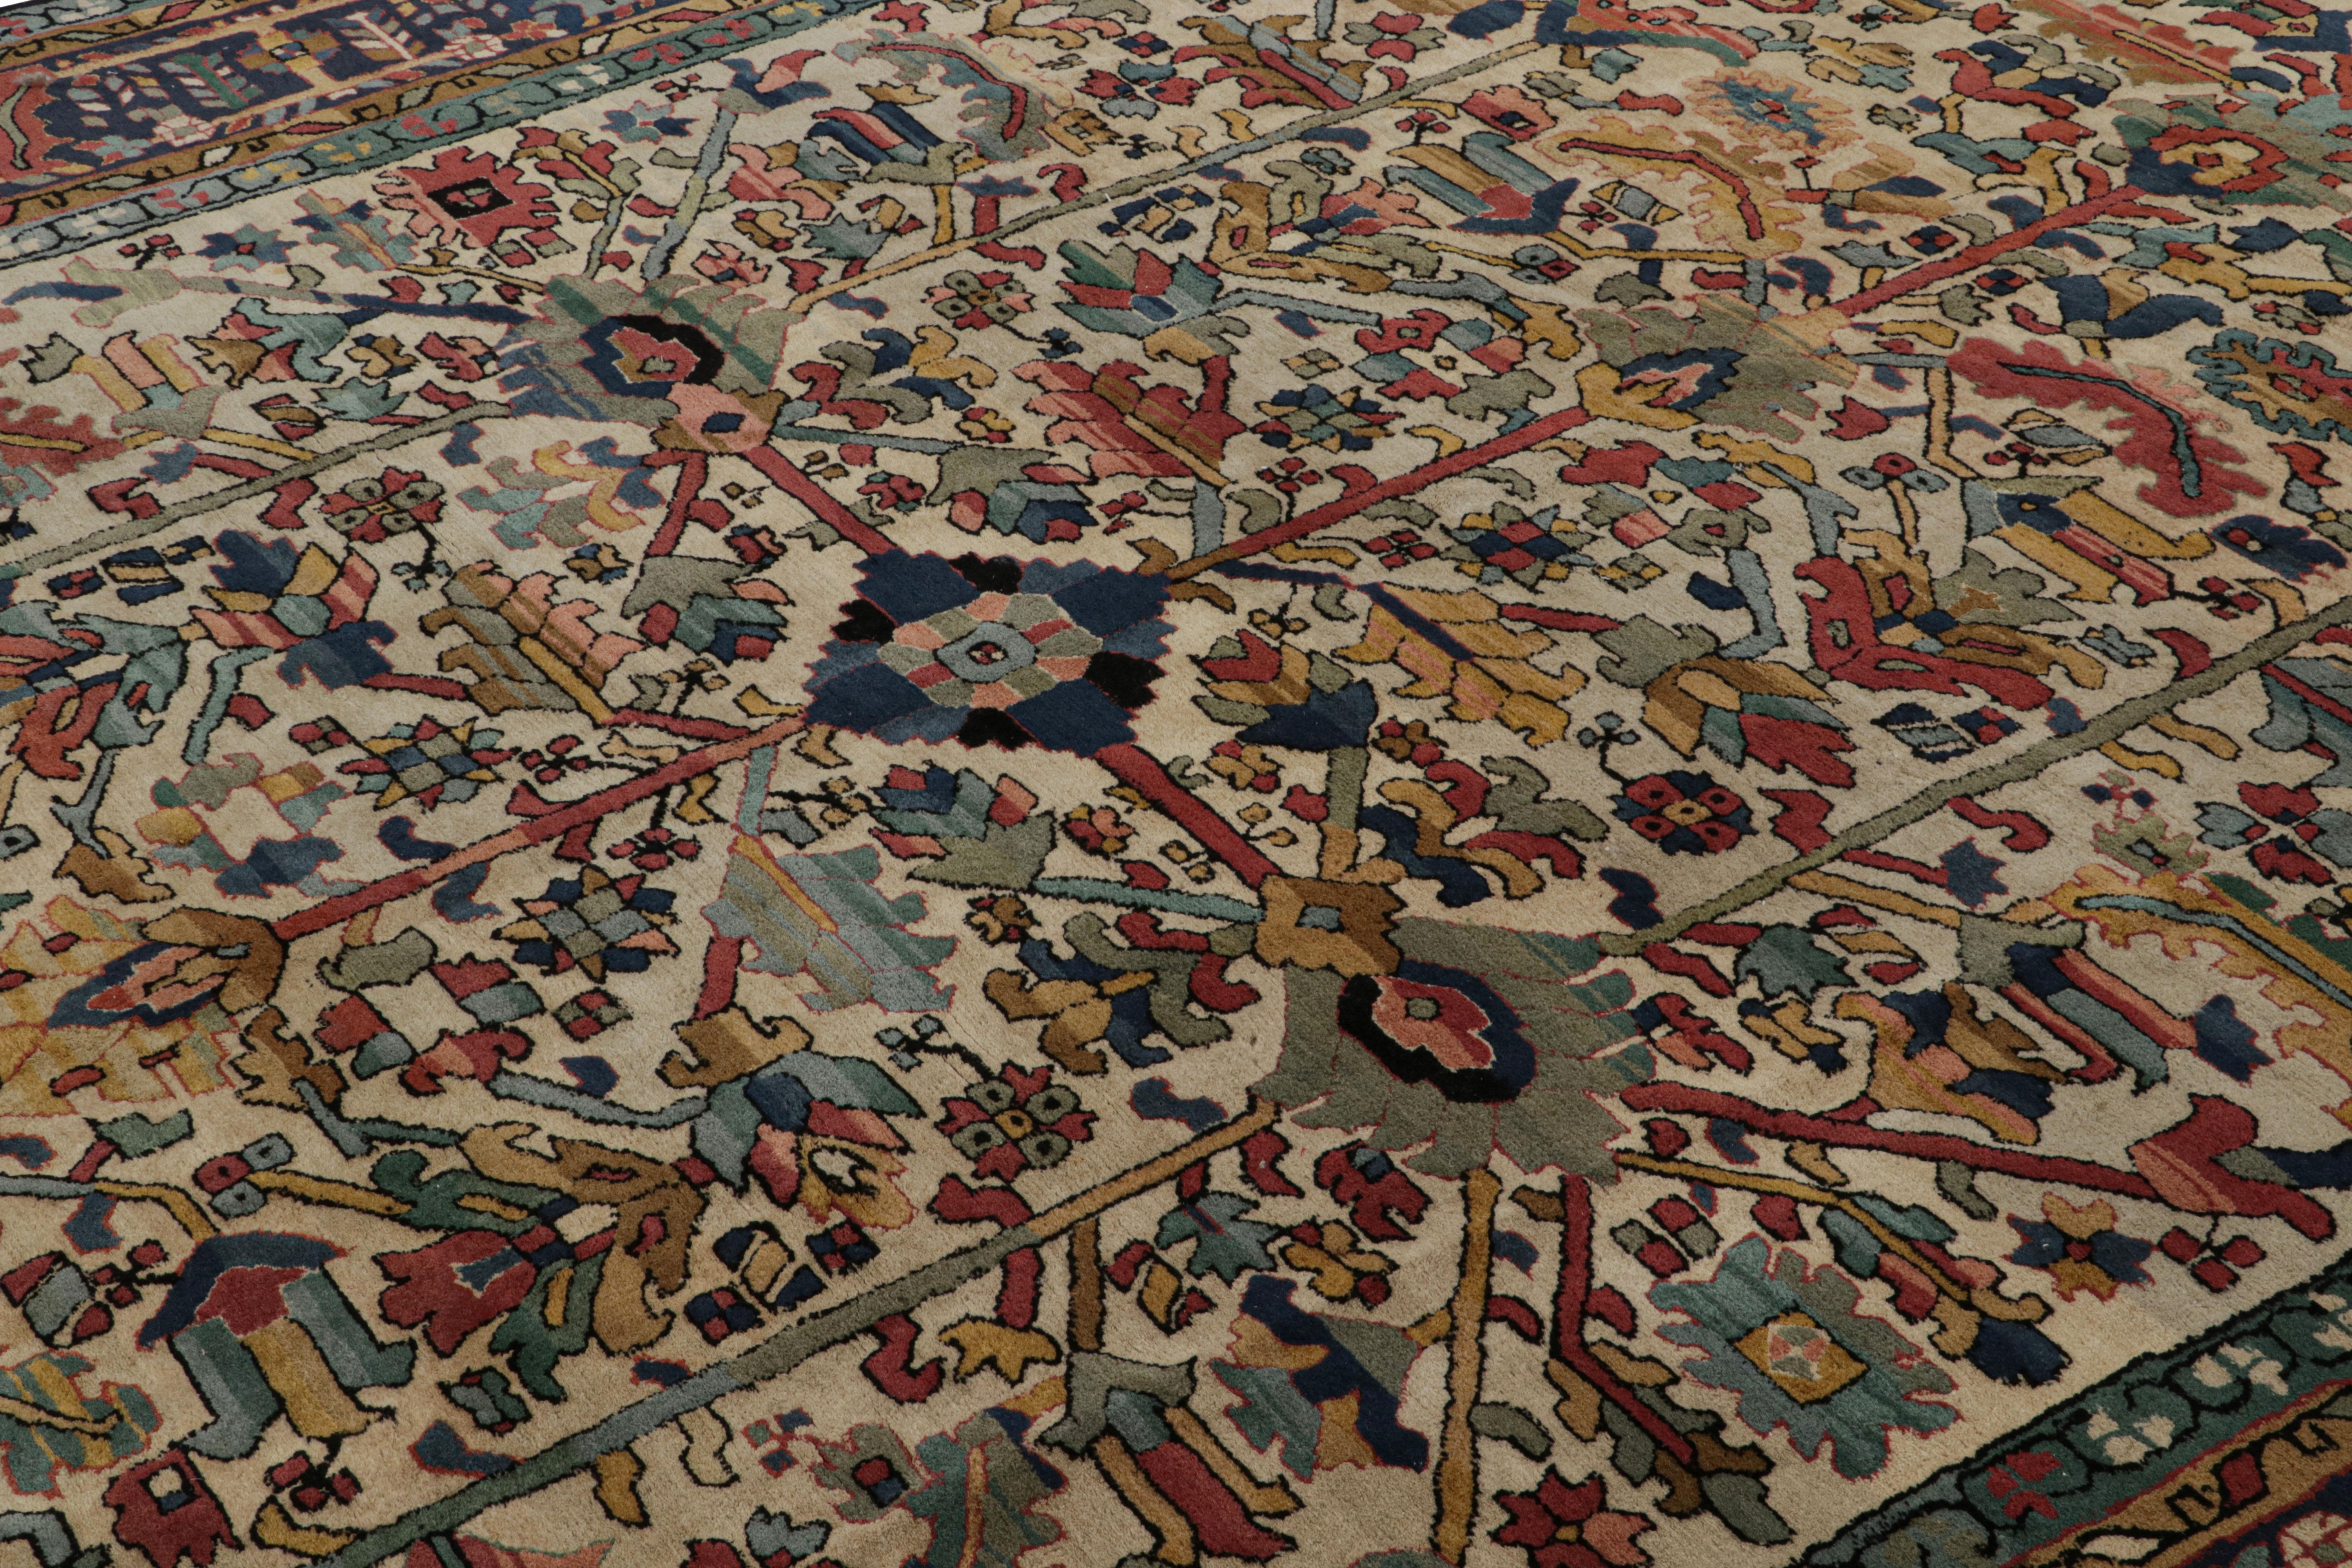 Hand-Knotted intage European Rug in Polychromatic Geometric Patterns, from Rug & Kilim For Sale